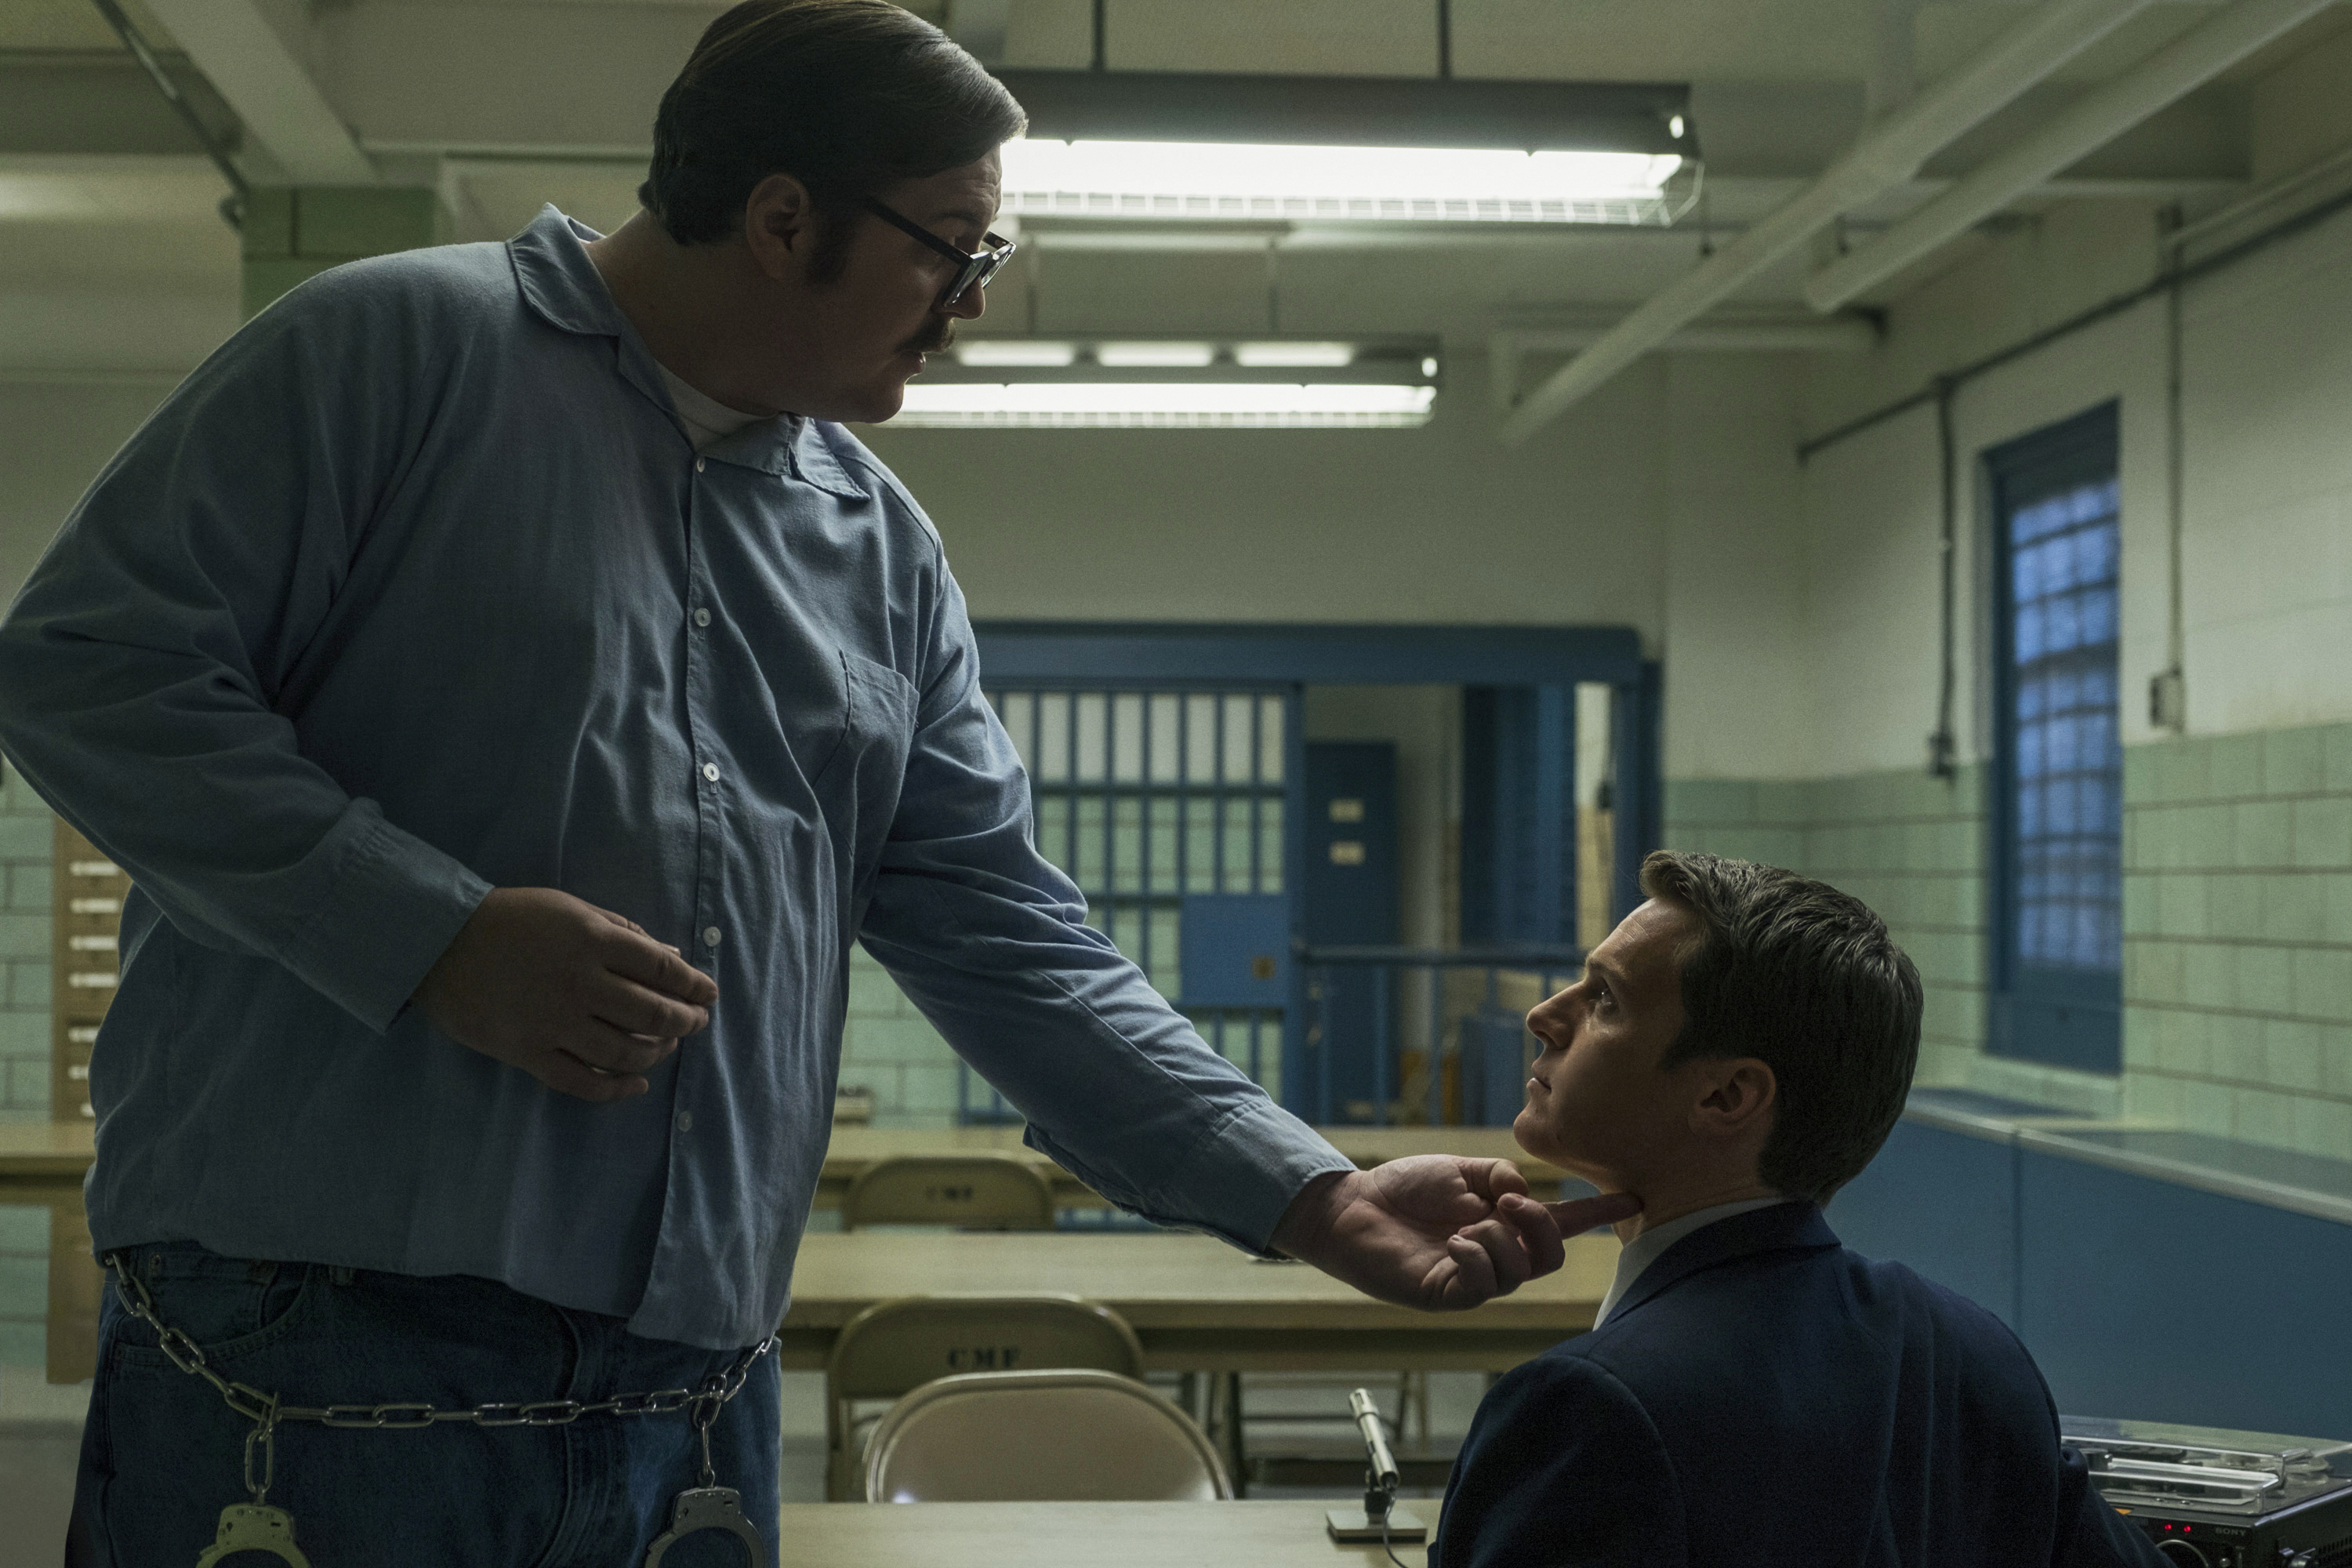 Mindhunter season 2 release date accidentally leaked?